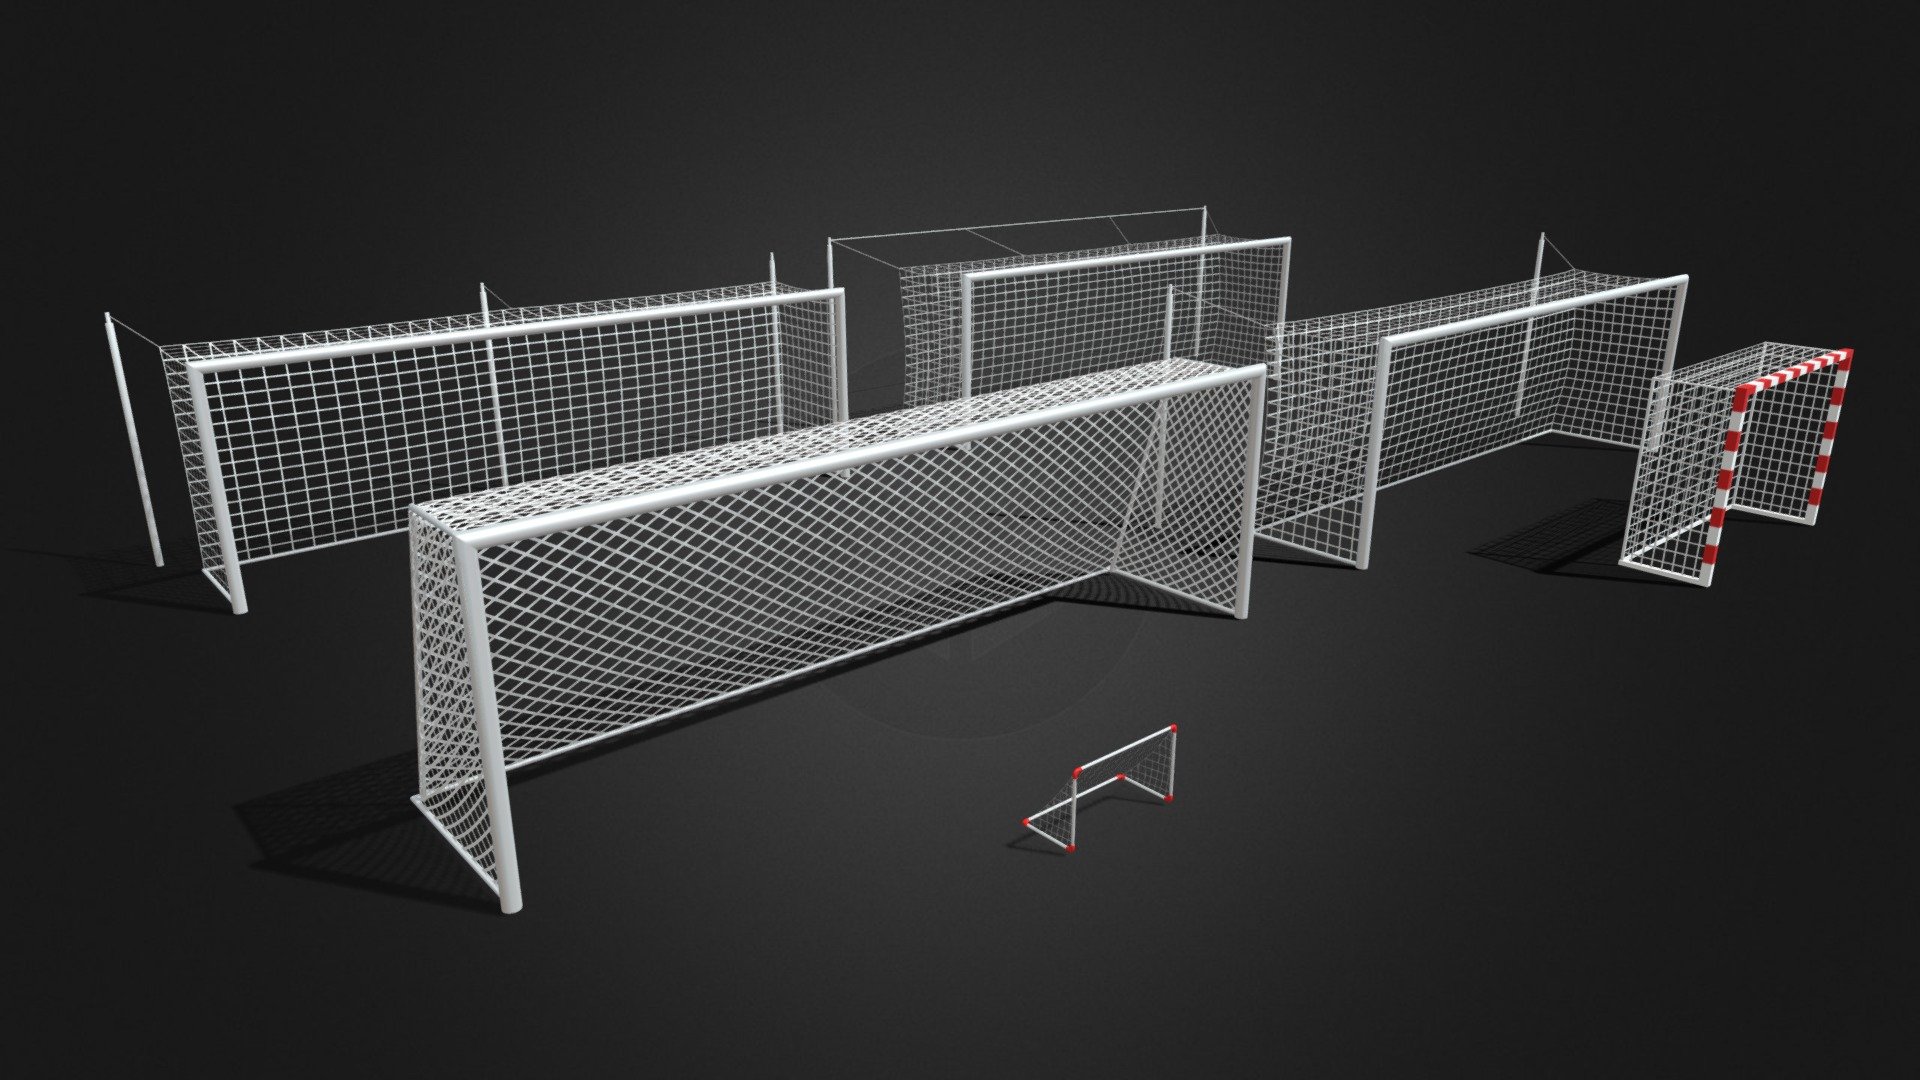 rar file contains the individual fbx models of the soccer goals
-futsal goal
-goals with 2 and 3 posts
-small goal for kids
-classic goal
-indoor goal - Football Goal Pack 3D - Buy Royalty Free 3D model by Shin Xiba 3D (@Xiba3D) 3d model